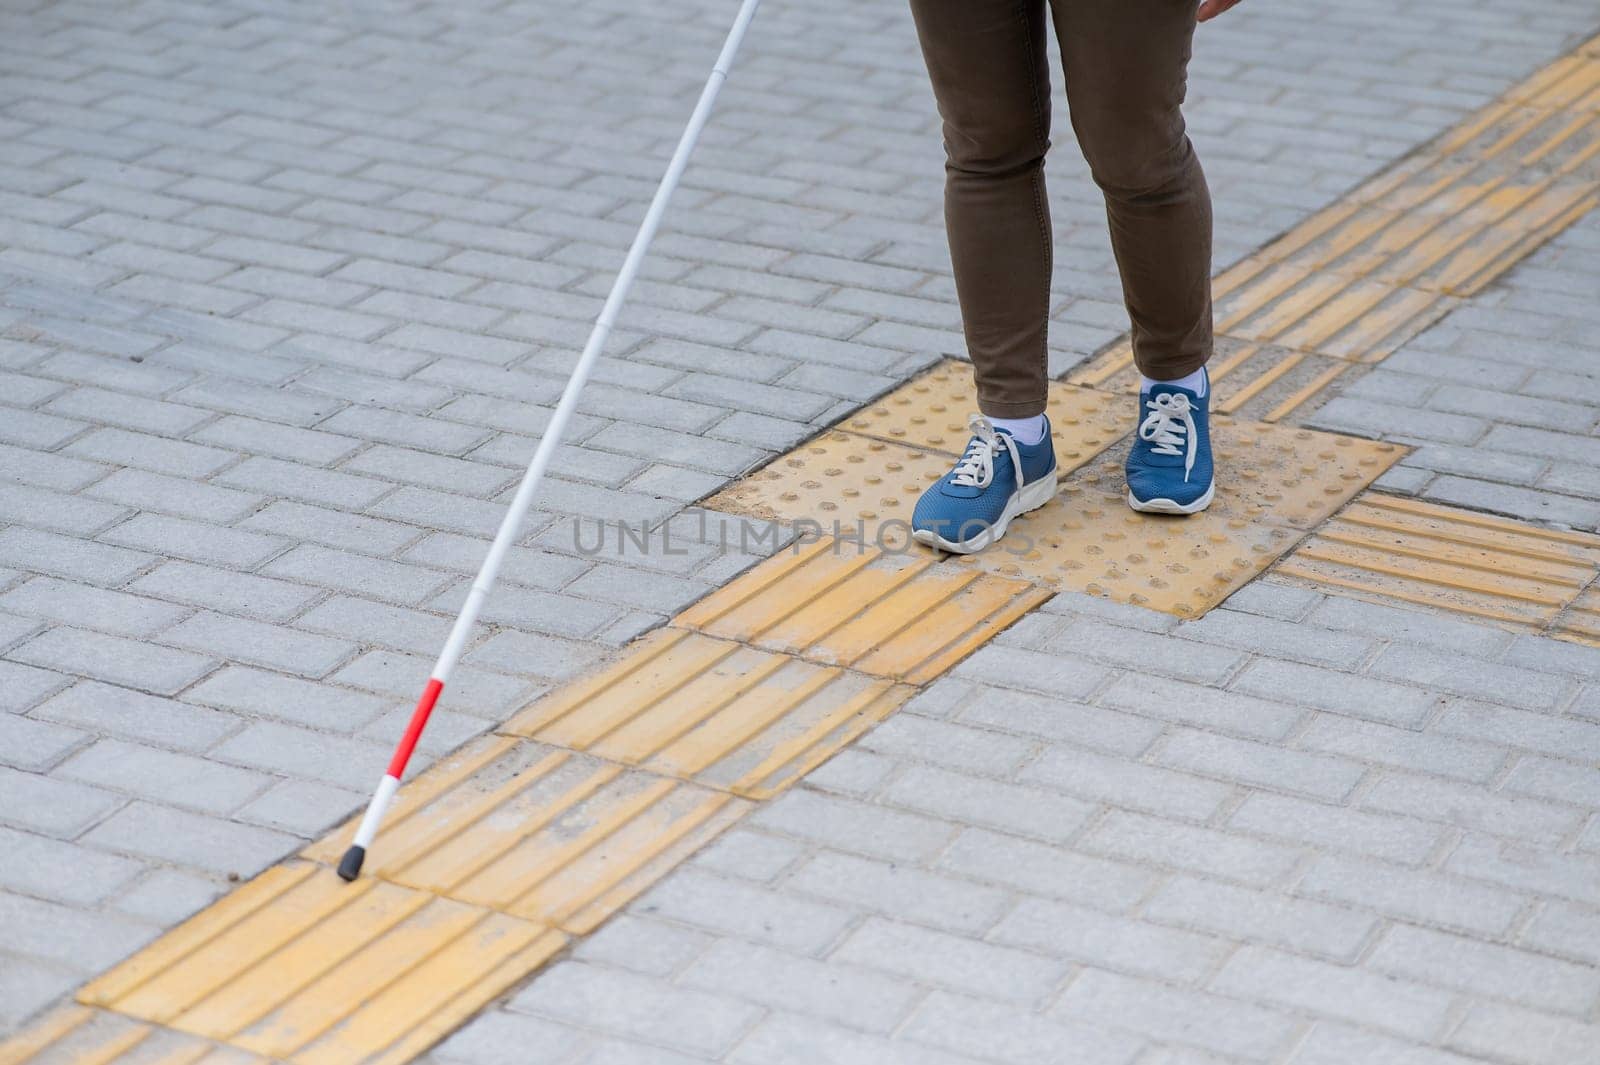 Close-up of a woman's legs with a cane near a tactile tile